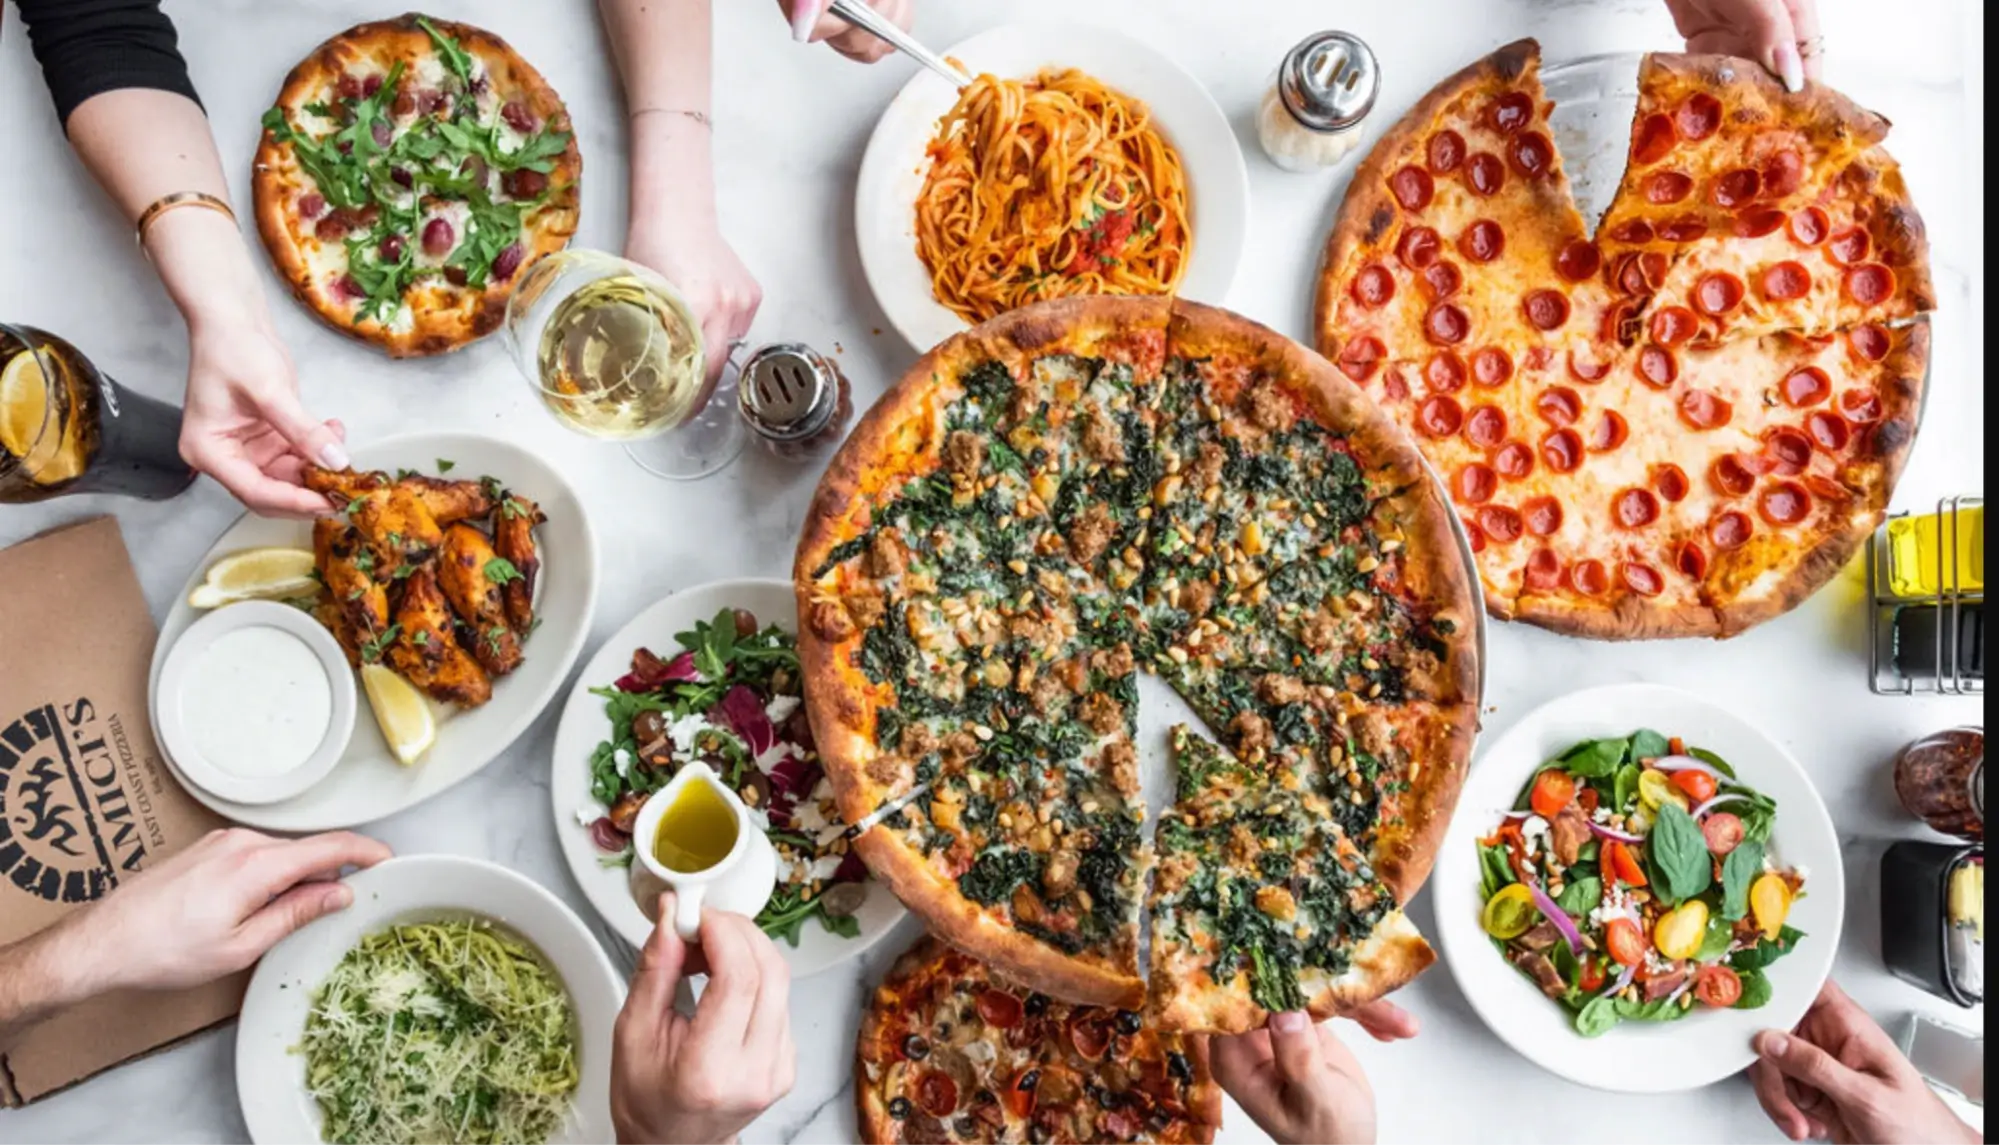 Hands reaching for slices of different pizzas, chicken wings, and salads on a table